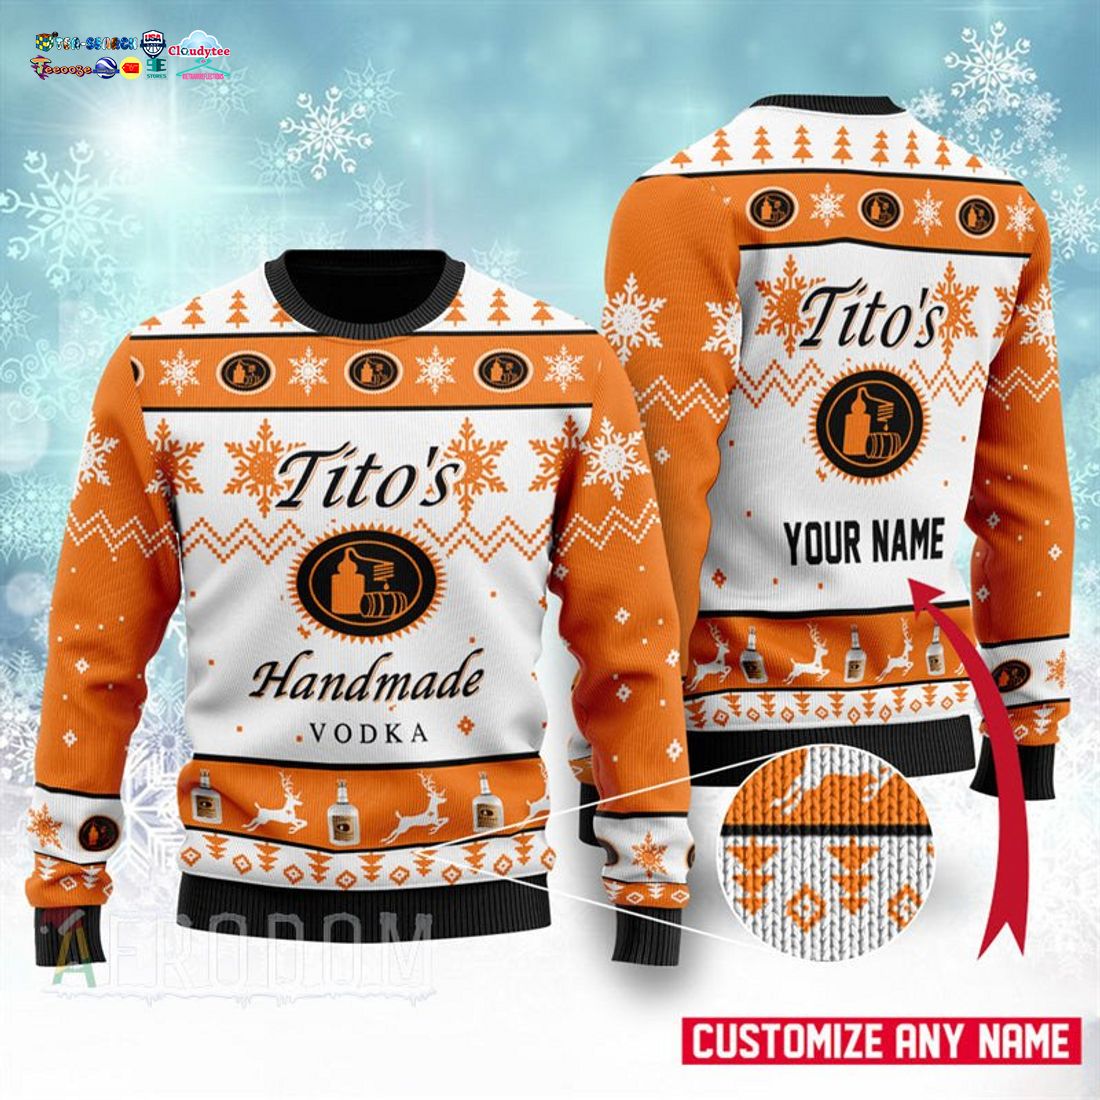 Personalized Name Tito’s Handmade Vodka Ver 1 Ugly Christmas Sweater